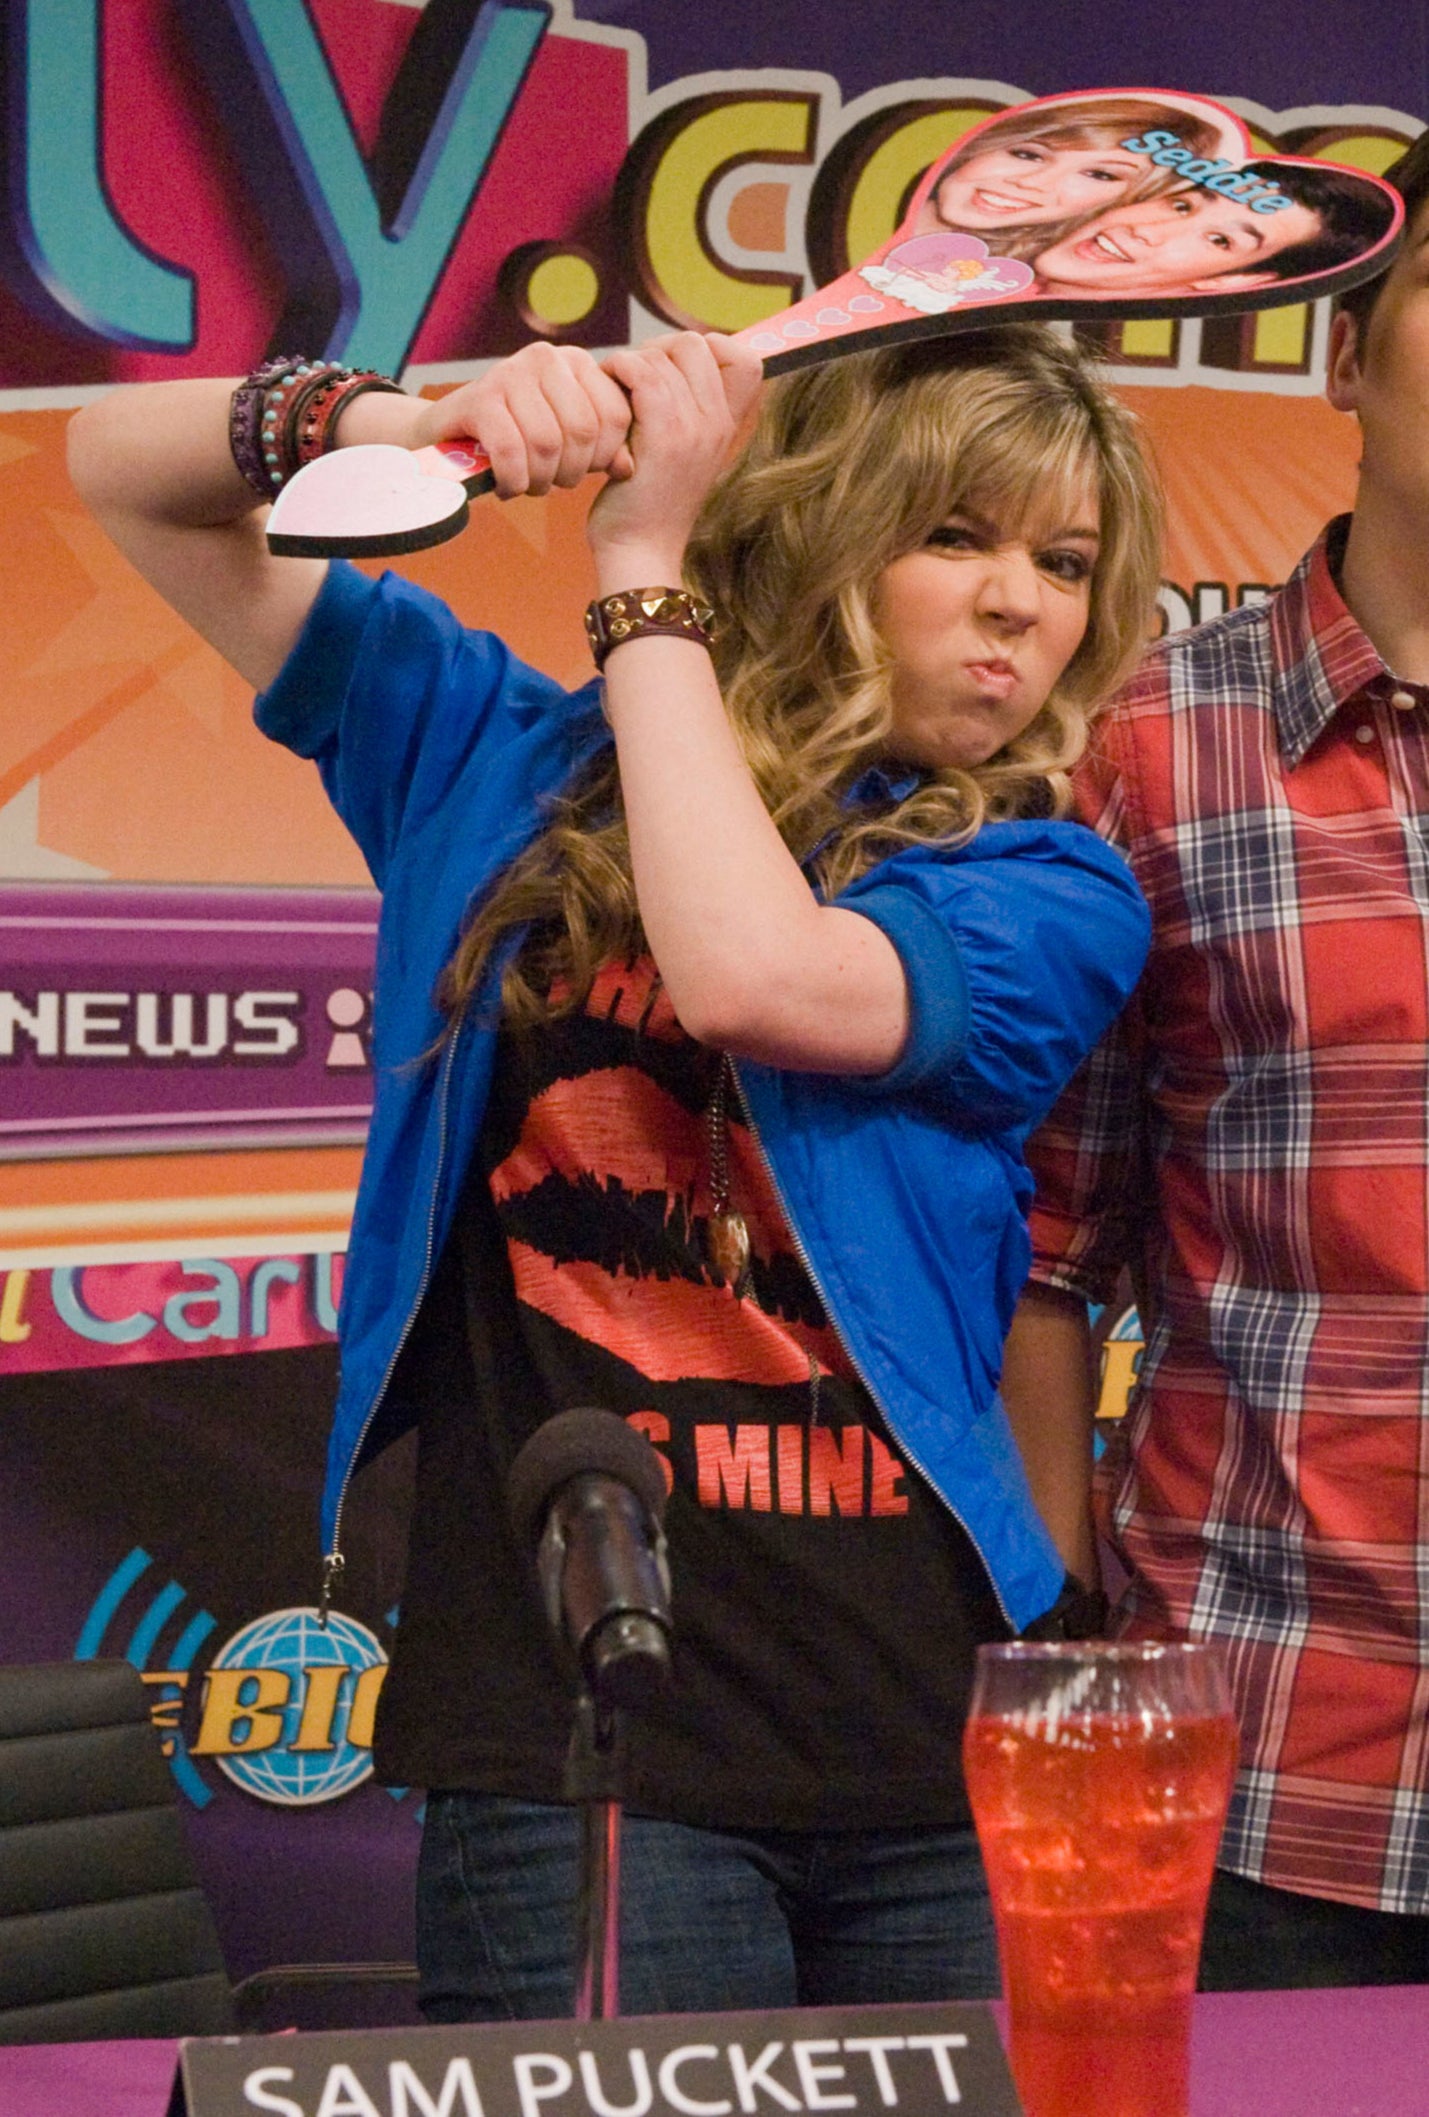 in a scene, Sam brandishing a heart-shaped &quot;Seddie&quot; sign